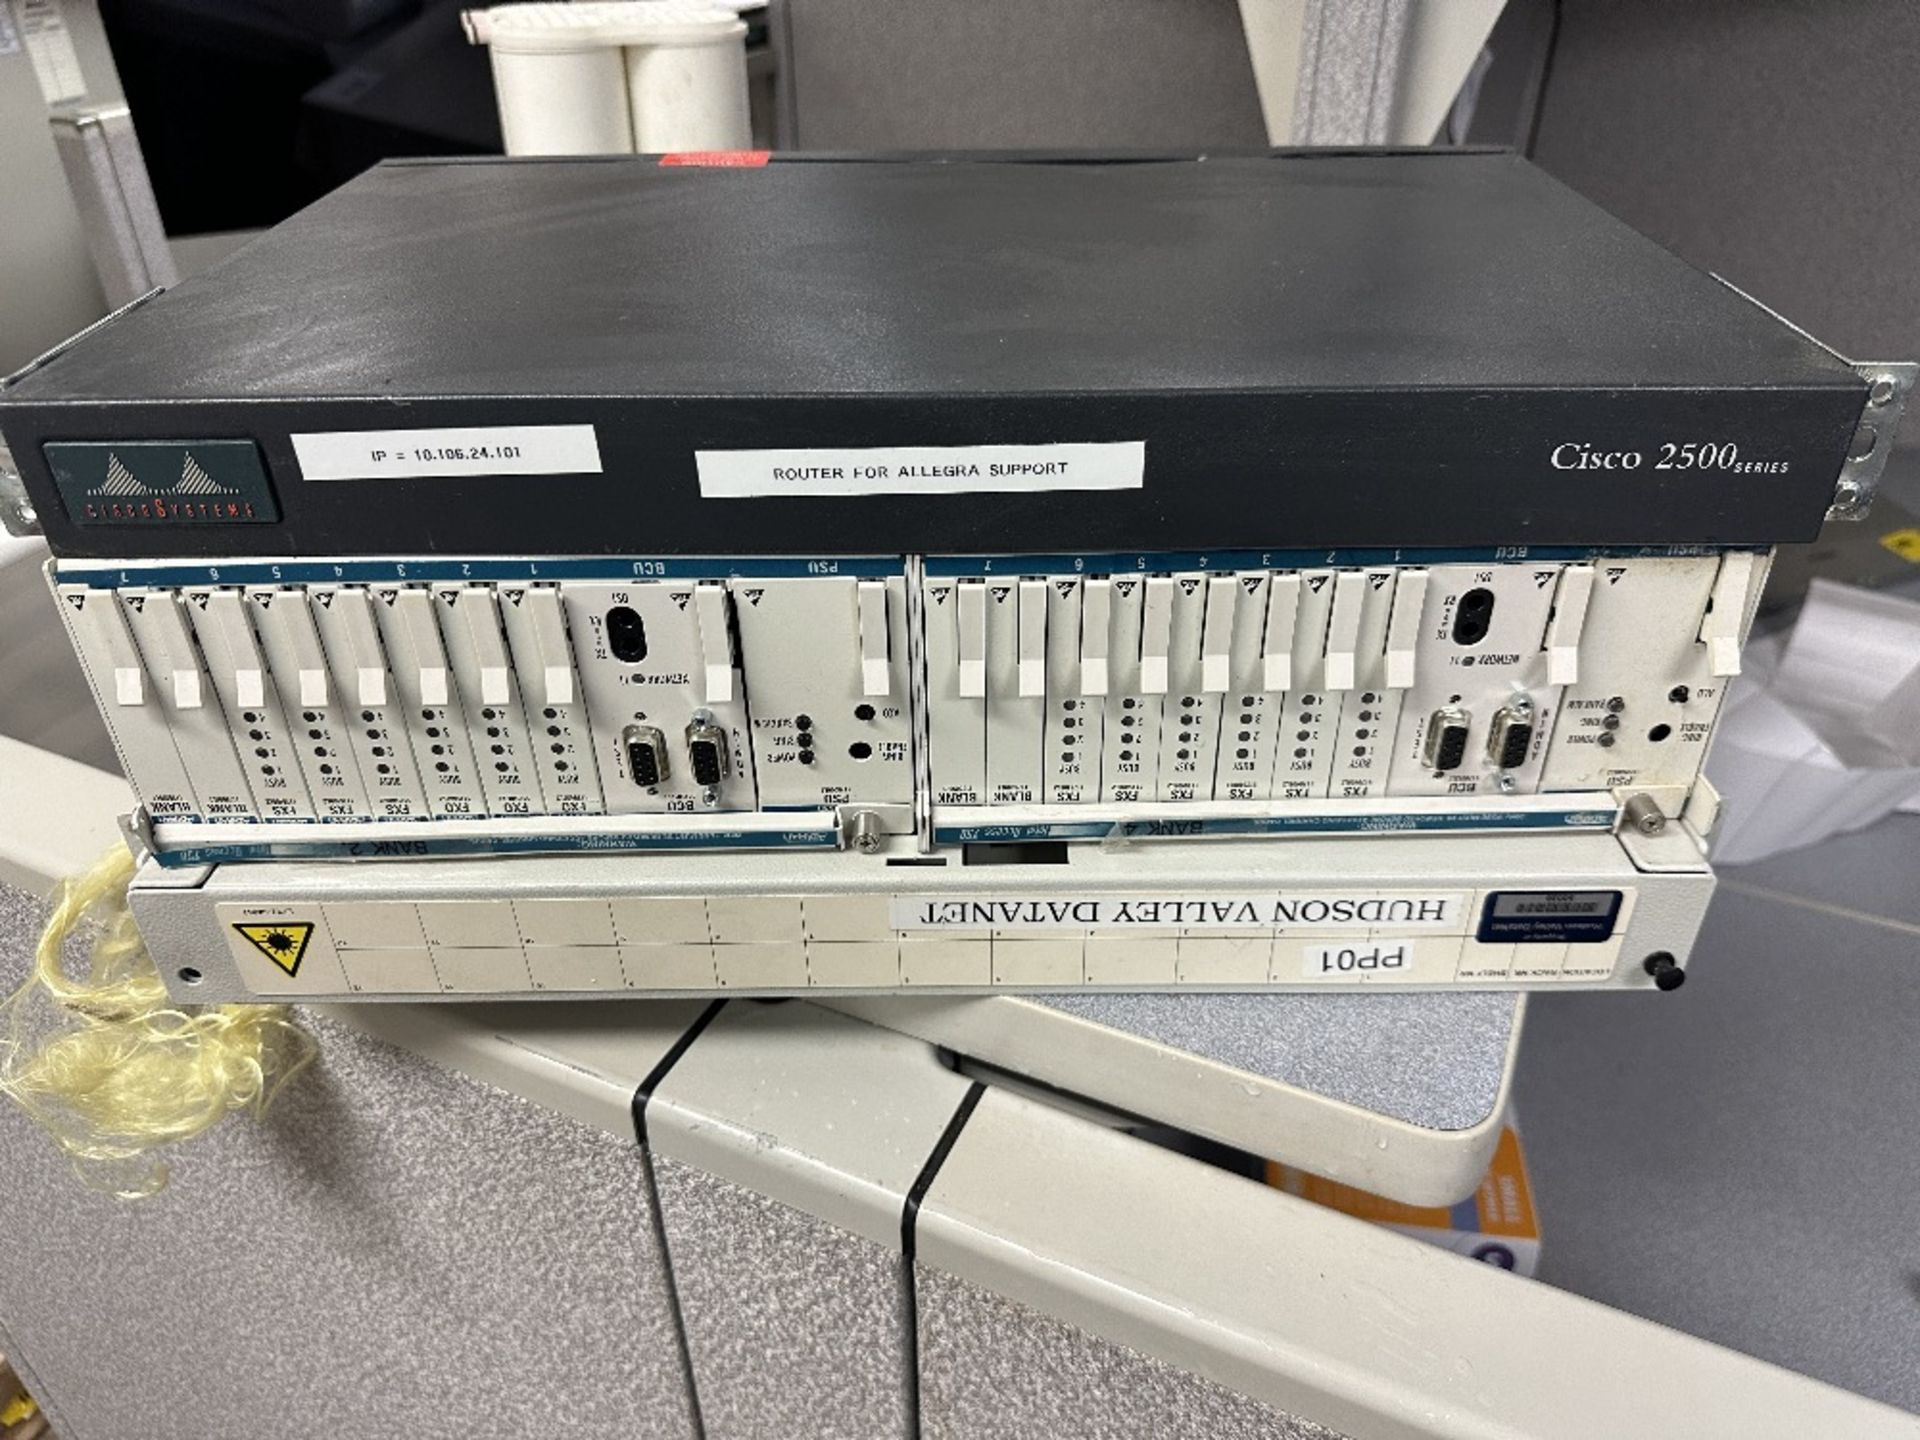 IT Equipment Rack Adtran, Cisco 2501 (LOCATED IN MIDDLETOWN, N.Y.)-FOR PACKAGING & SHIPPING QUOTE,